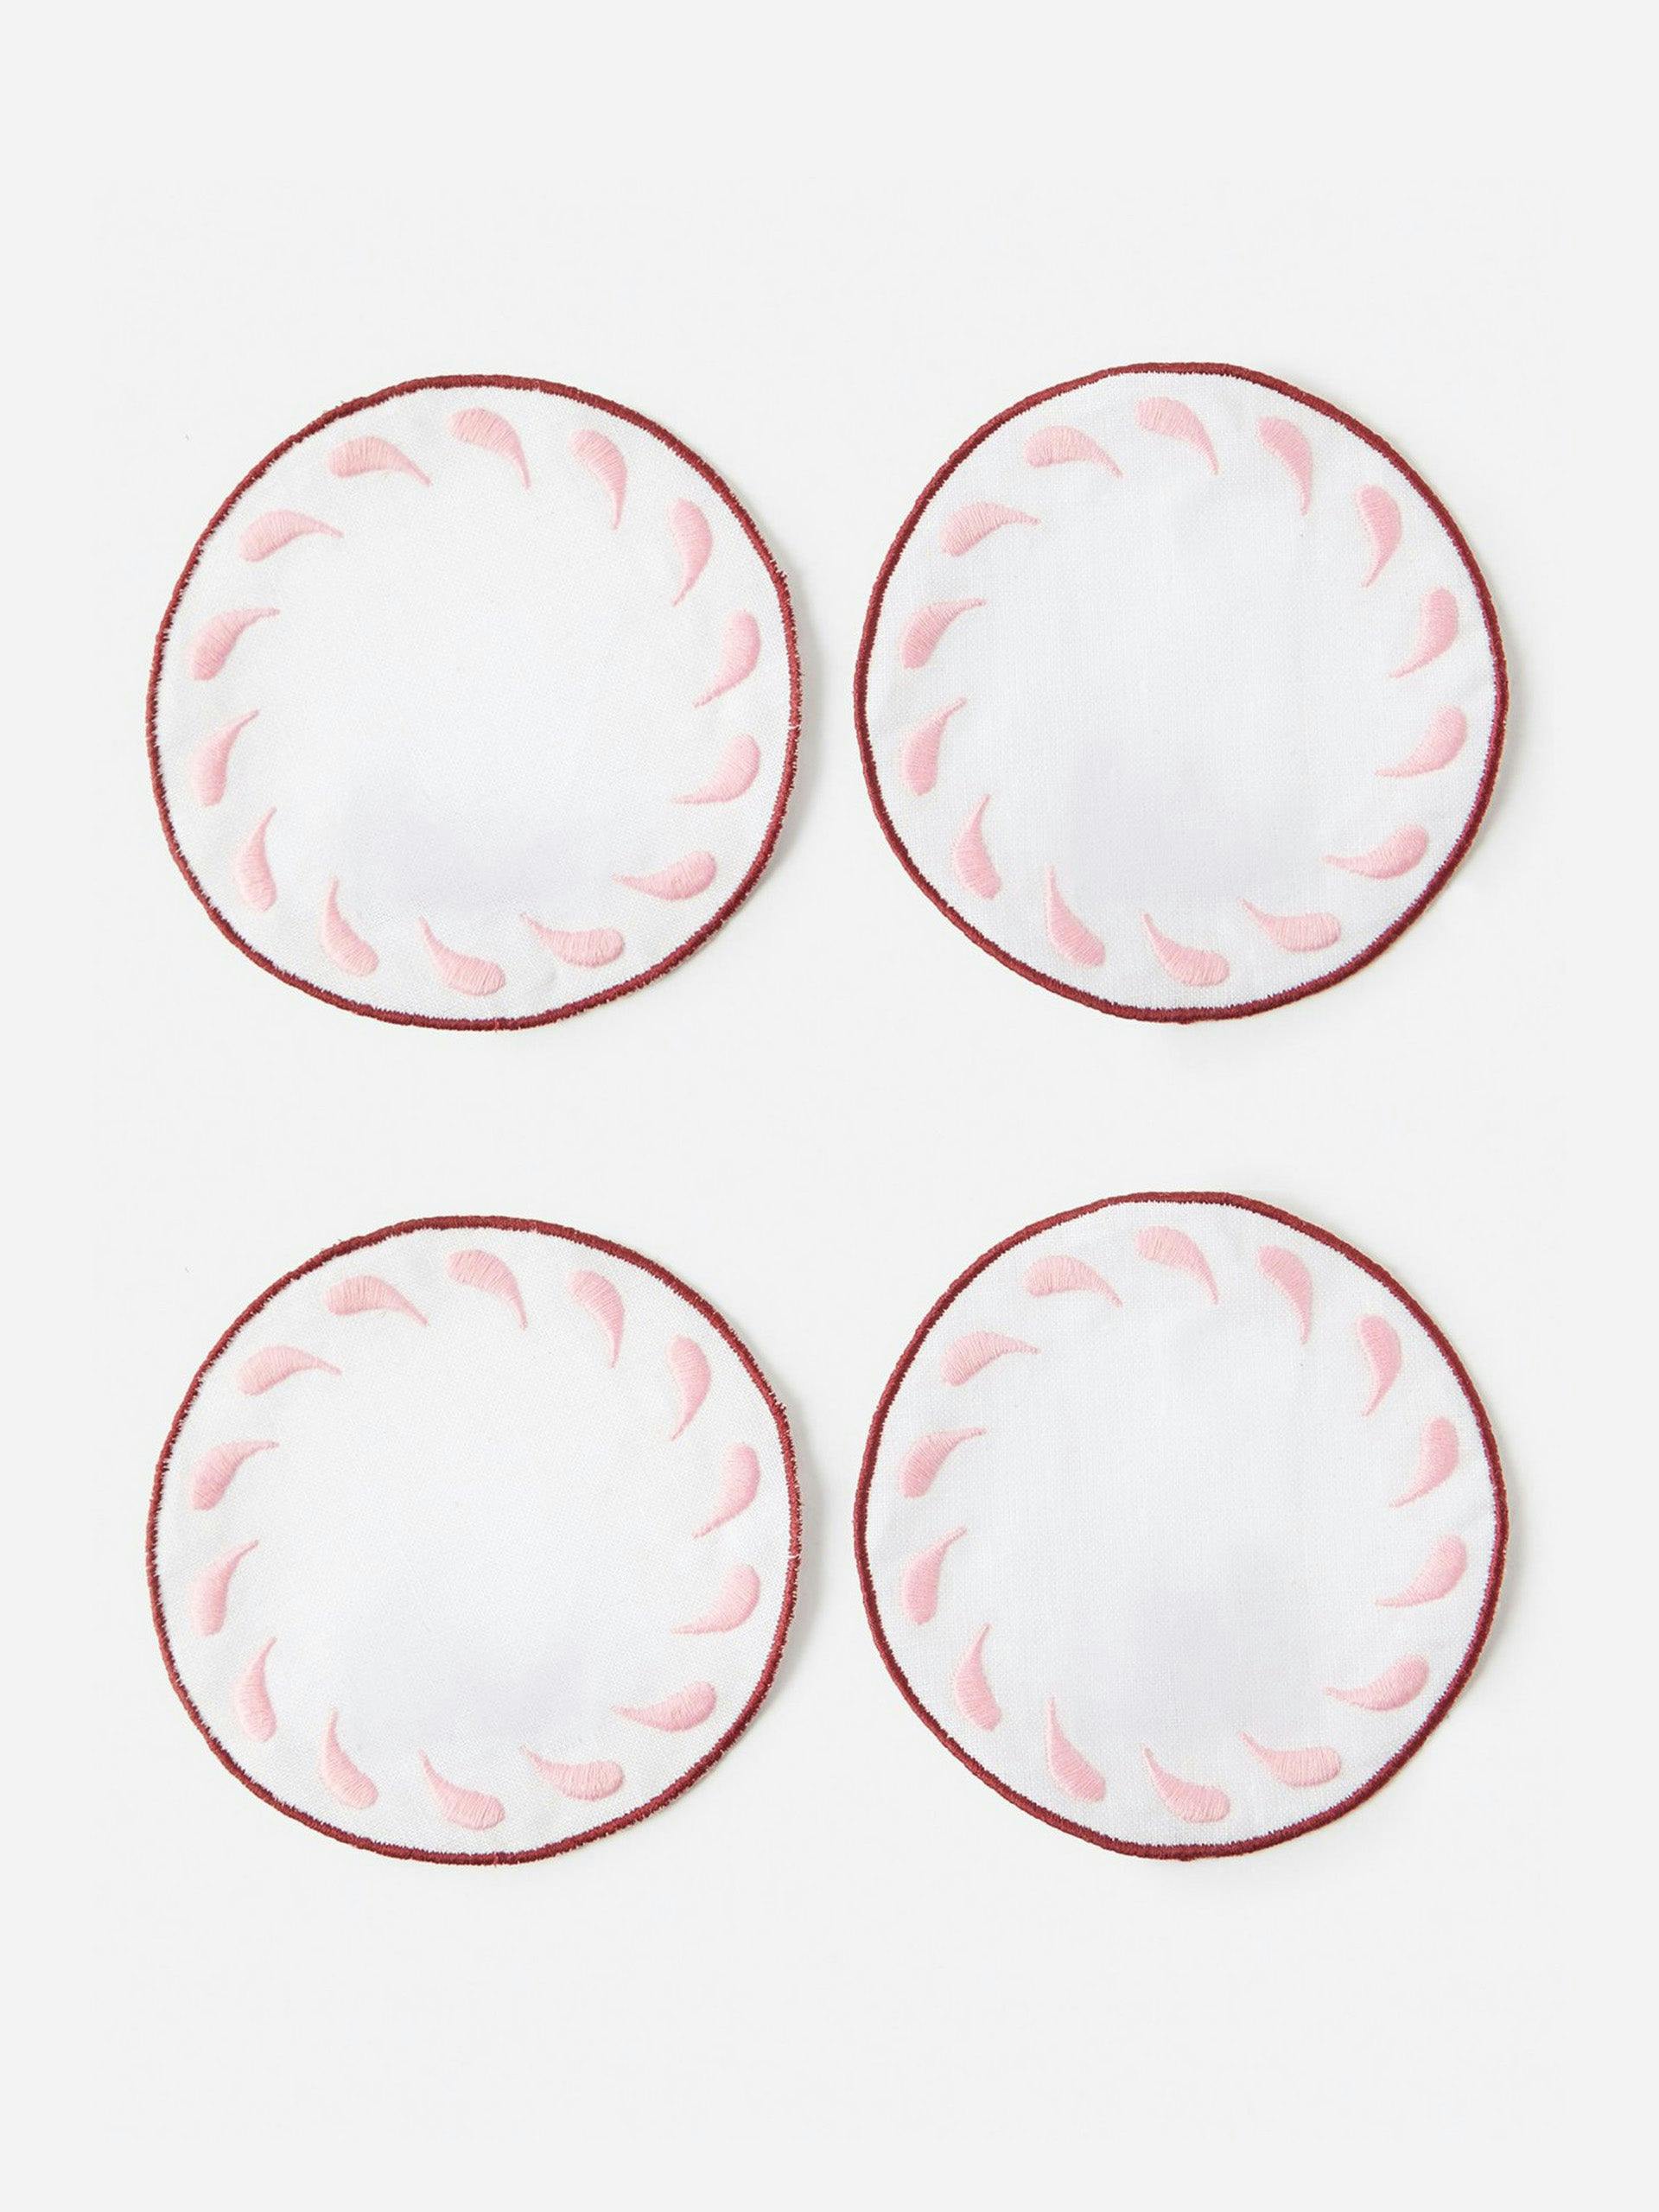 White, red and pink embroidered coasters (set of 4)